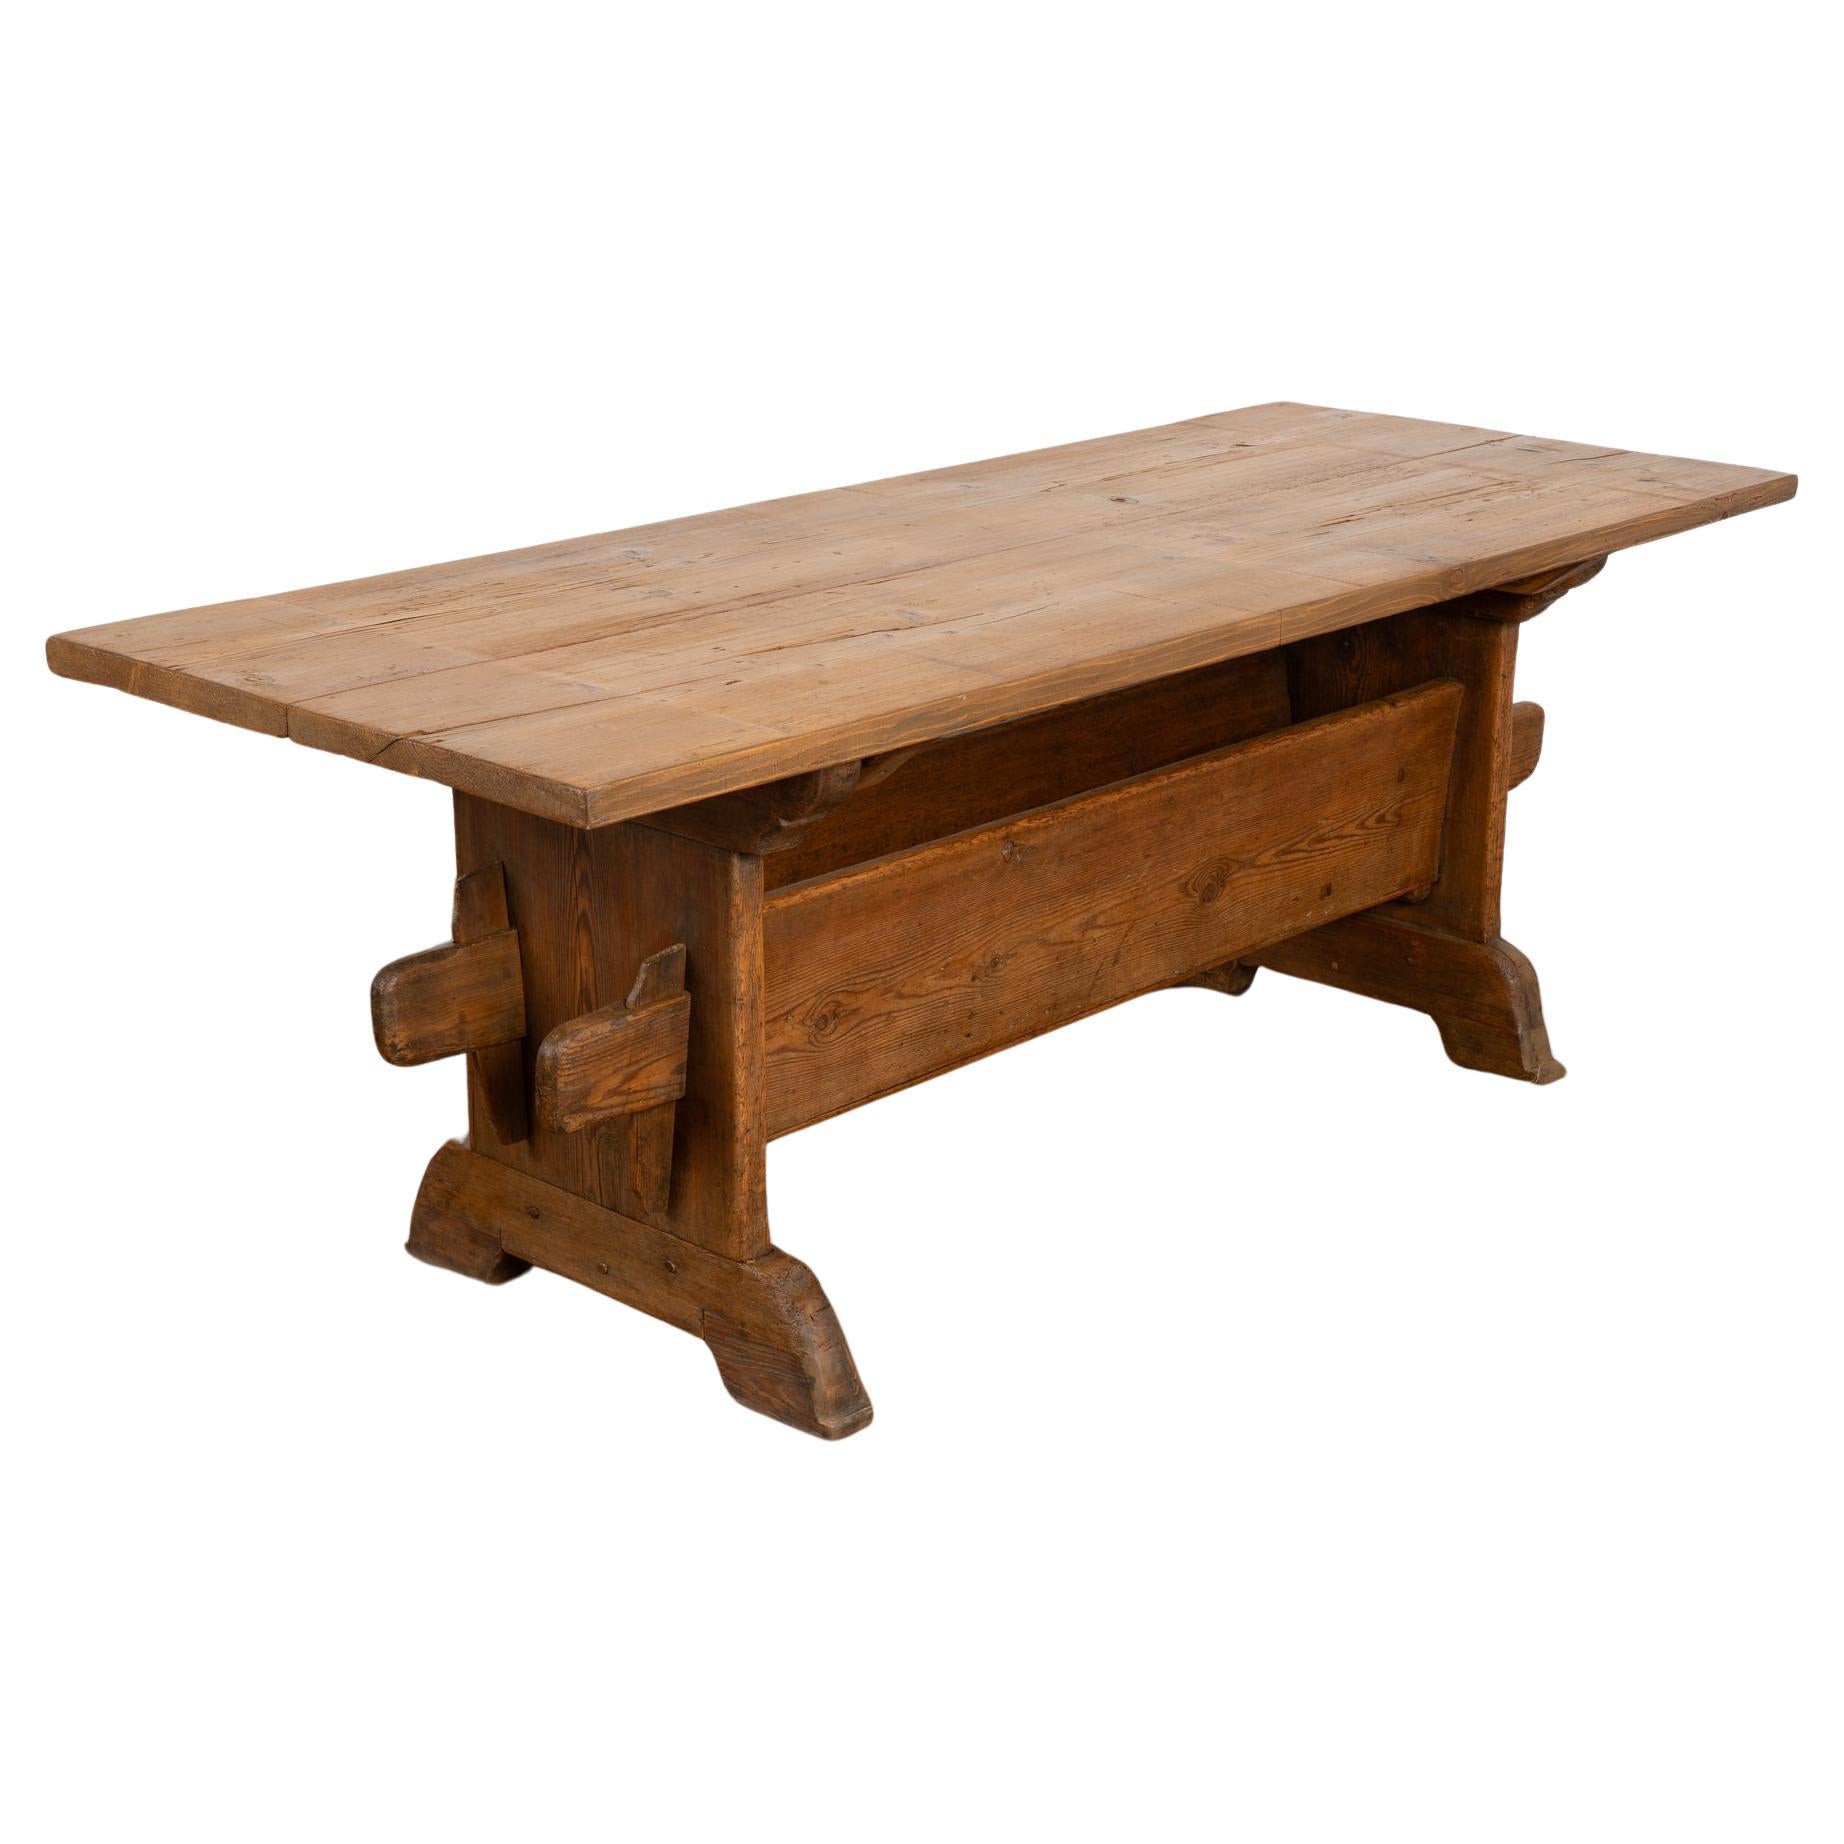 Antique Pine Farm Kitchen Dining Table, Sweden circa 1800-20 For Sale